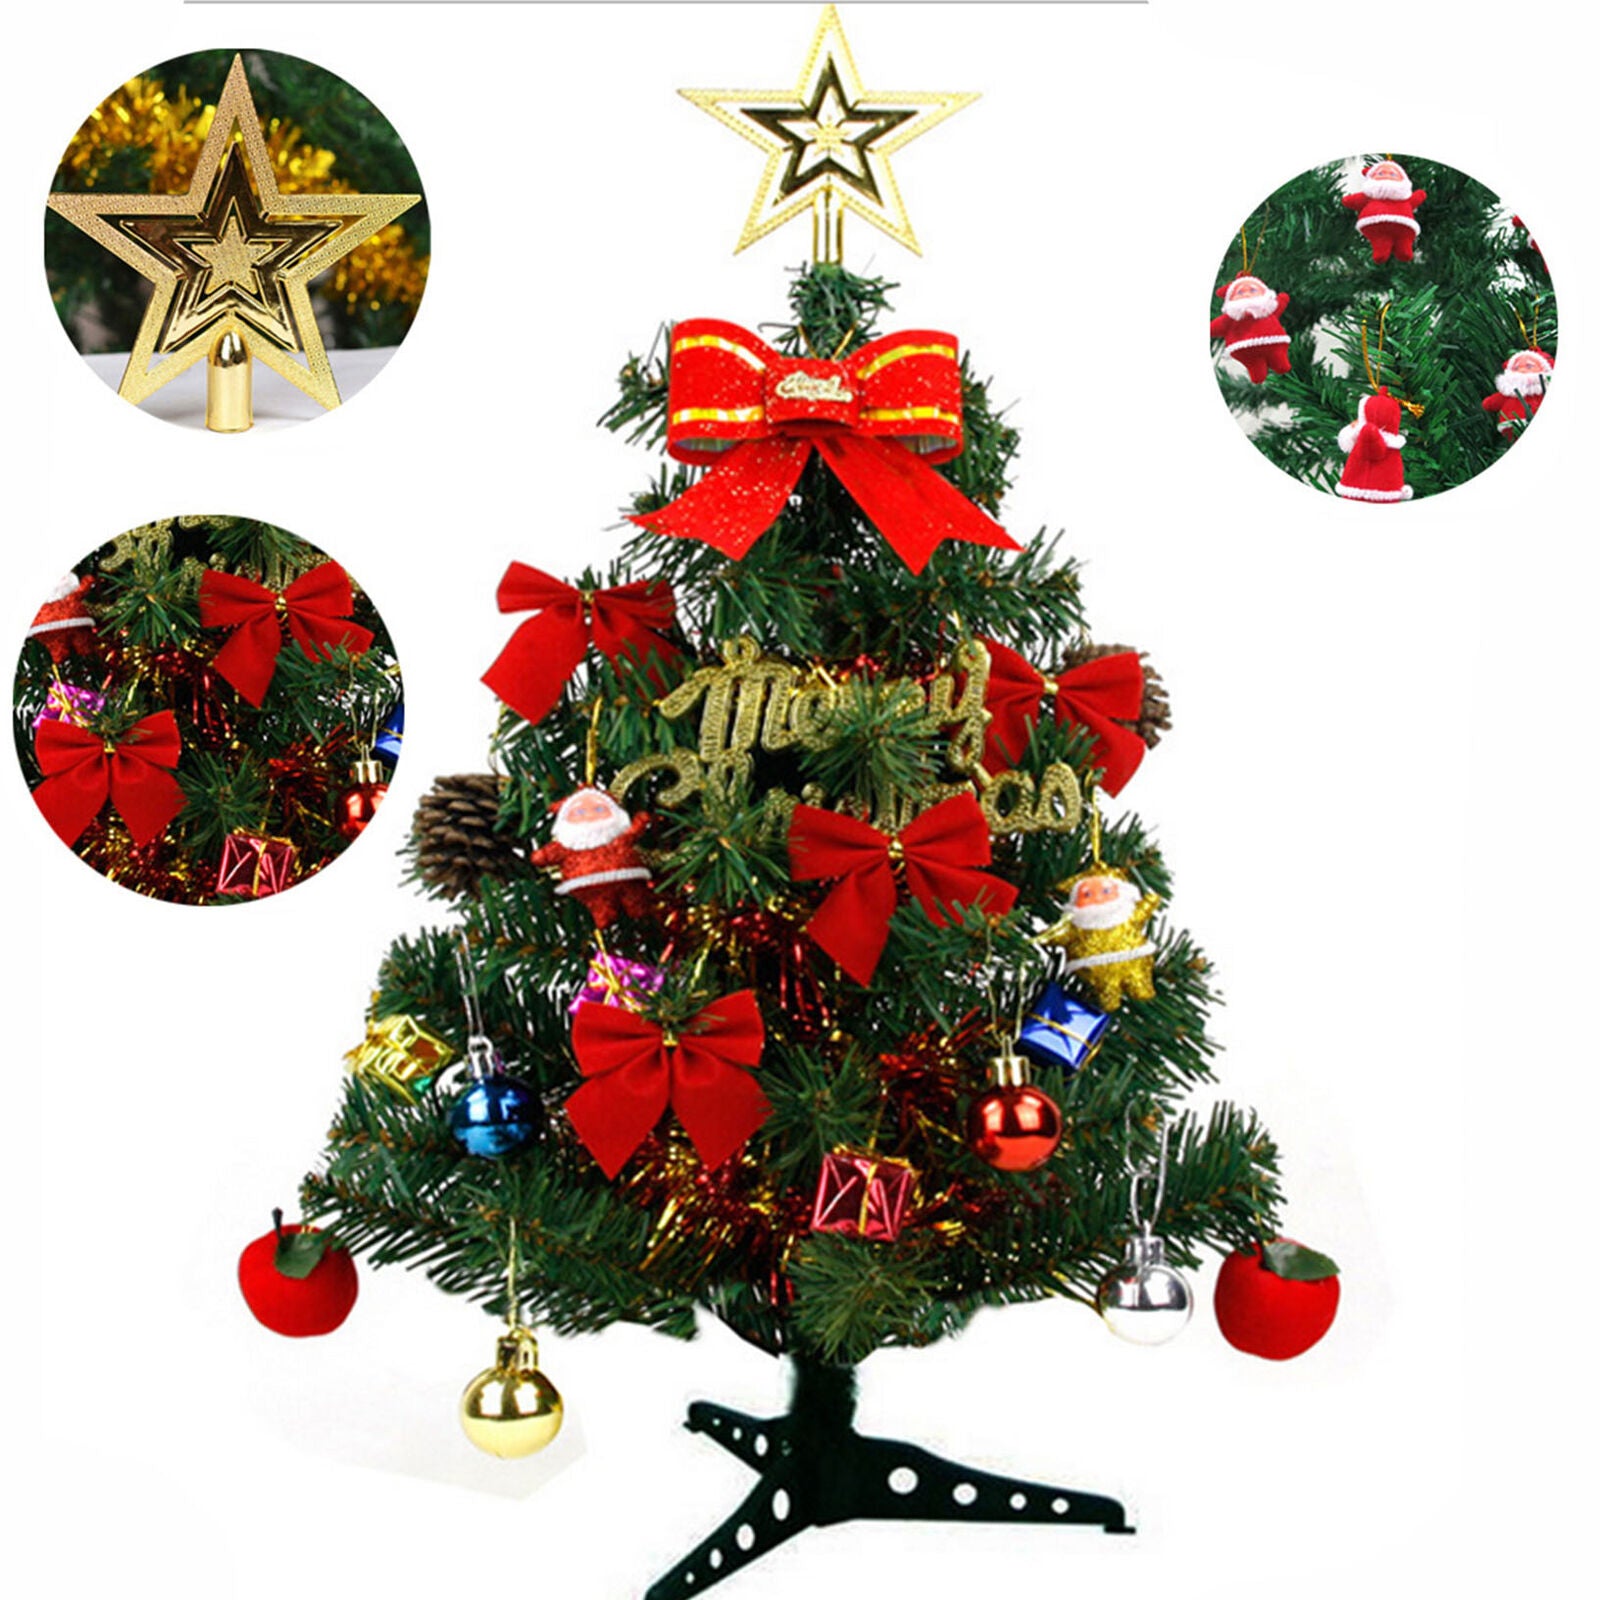 Tabletop Artificial Small Mini Christmas Tree With LED Lights & Ornaments Decor